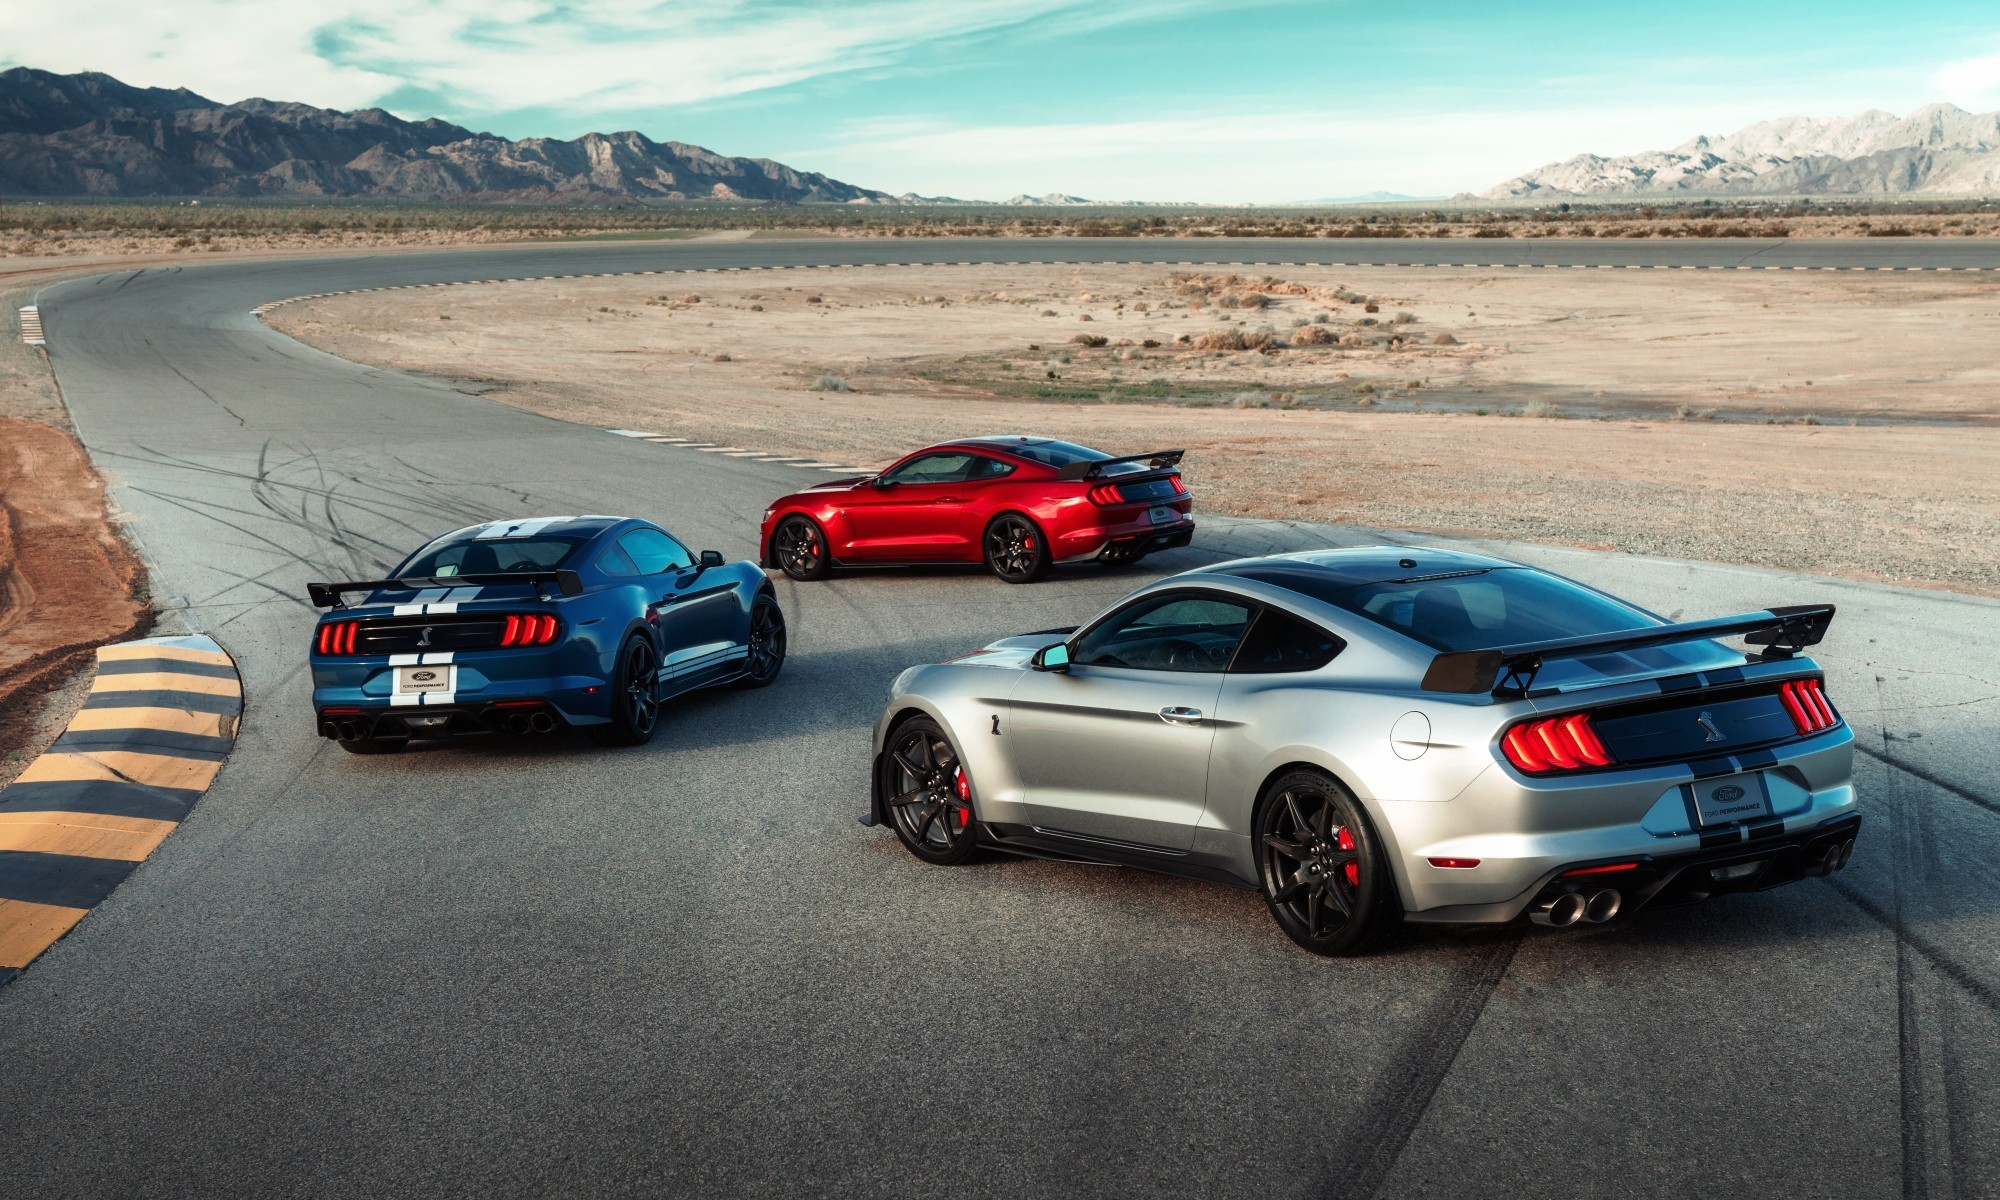 Mustang Shelby GT500 family